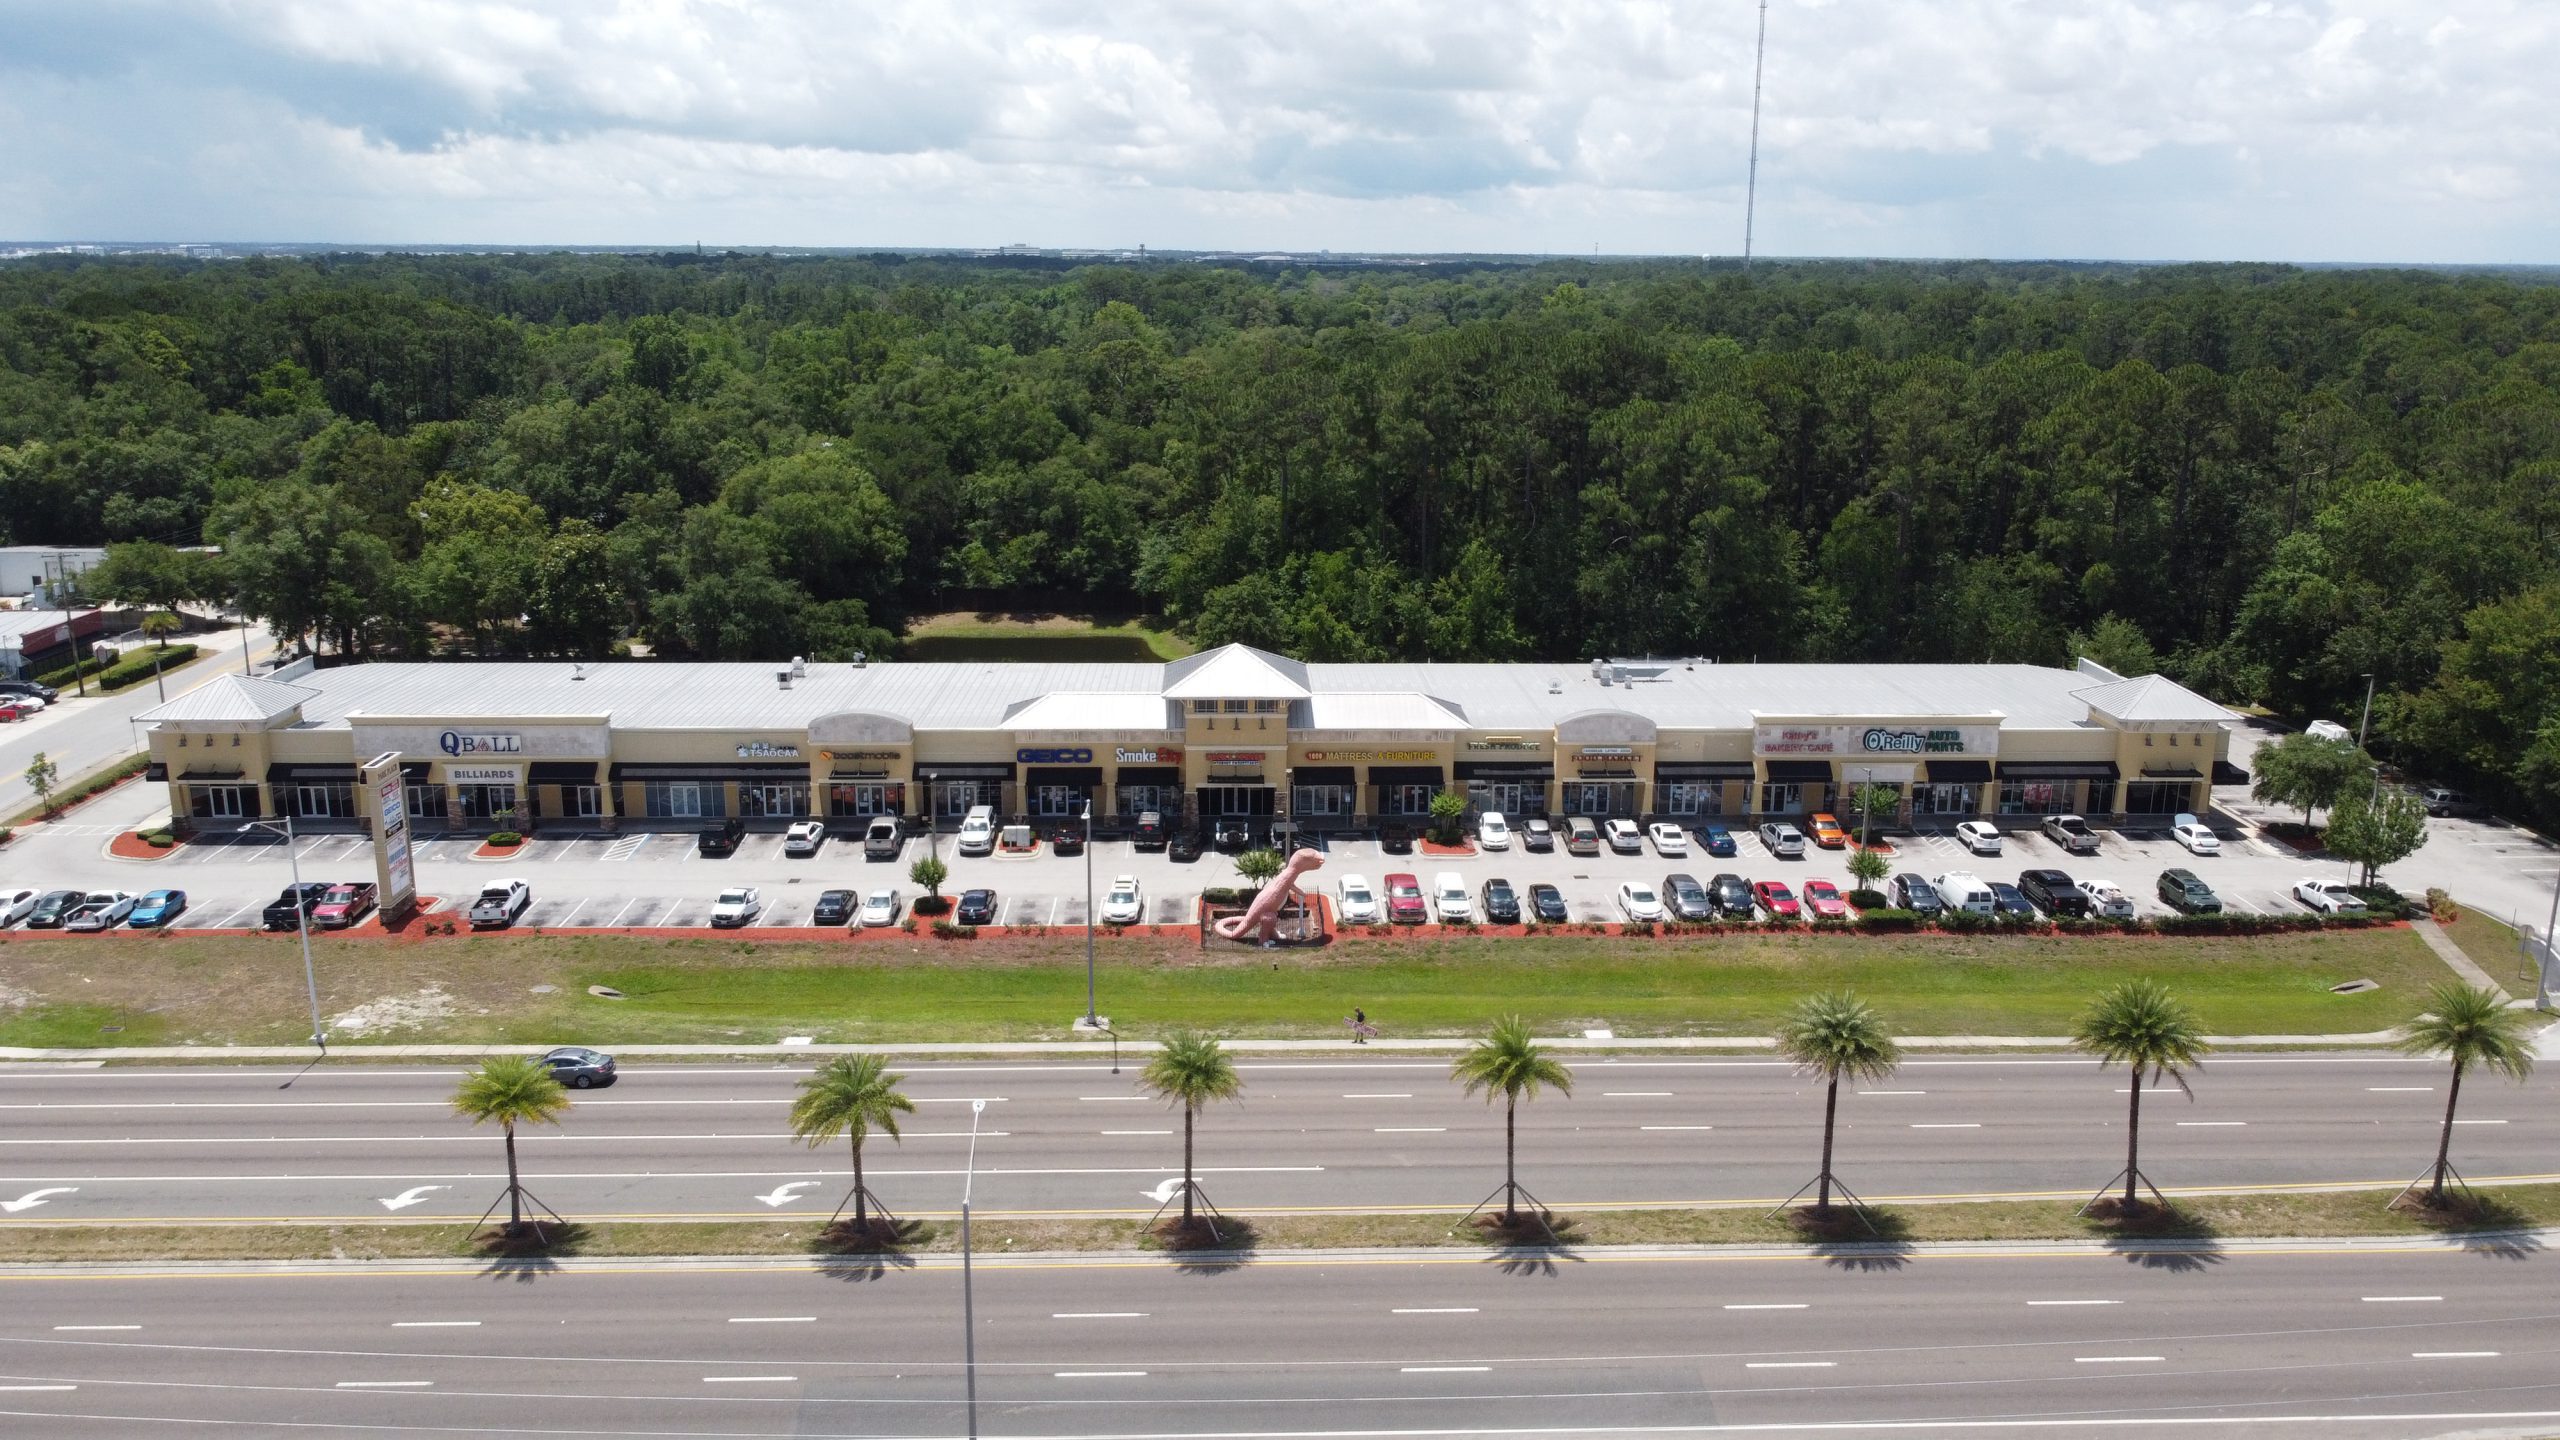 An aerial view of a one-story retail center & road.